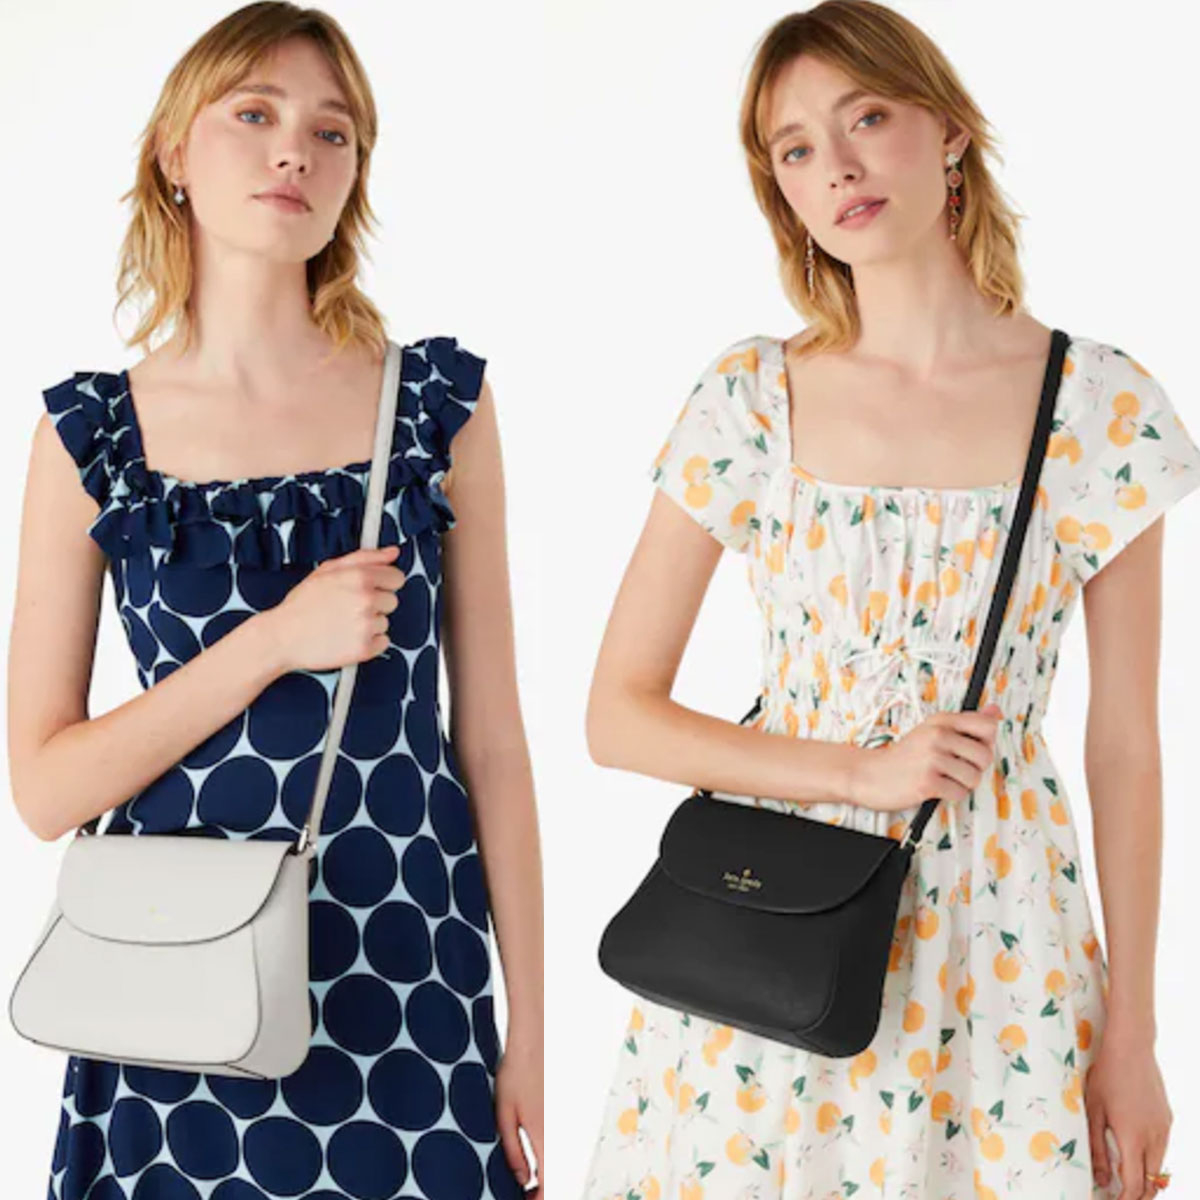 Kate Spade Monica flap crossbody for $69 (Reg $329) shipped TODAY ONLY